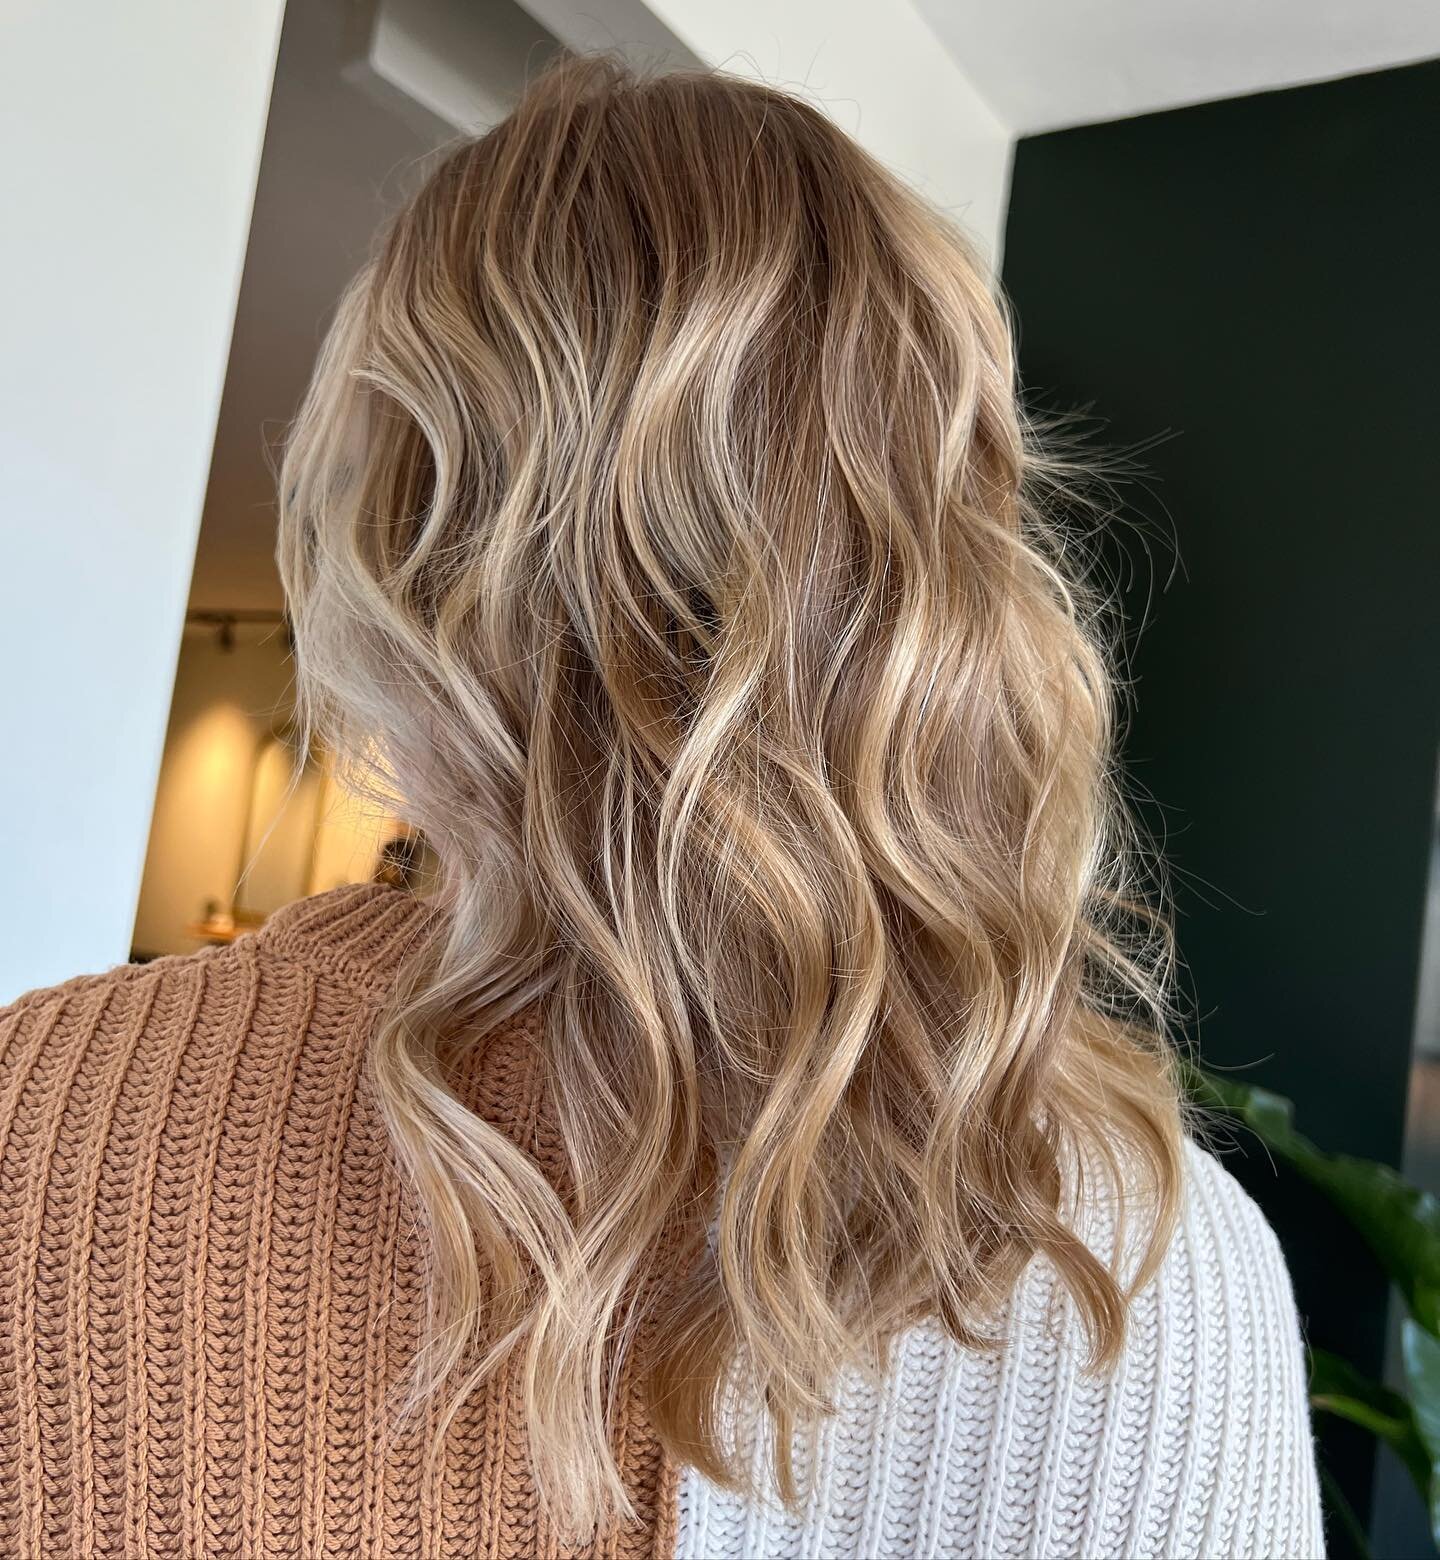 &ldquo;I still want to feel blonde, but I want to have more contrast and a more rooted look for fall&rdquo; 

Say no more babe ⚡️

If you&rsquo;ve been in you know I have been trying some new techniques + products and it has me super jazzed. 

What&r